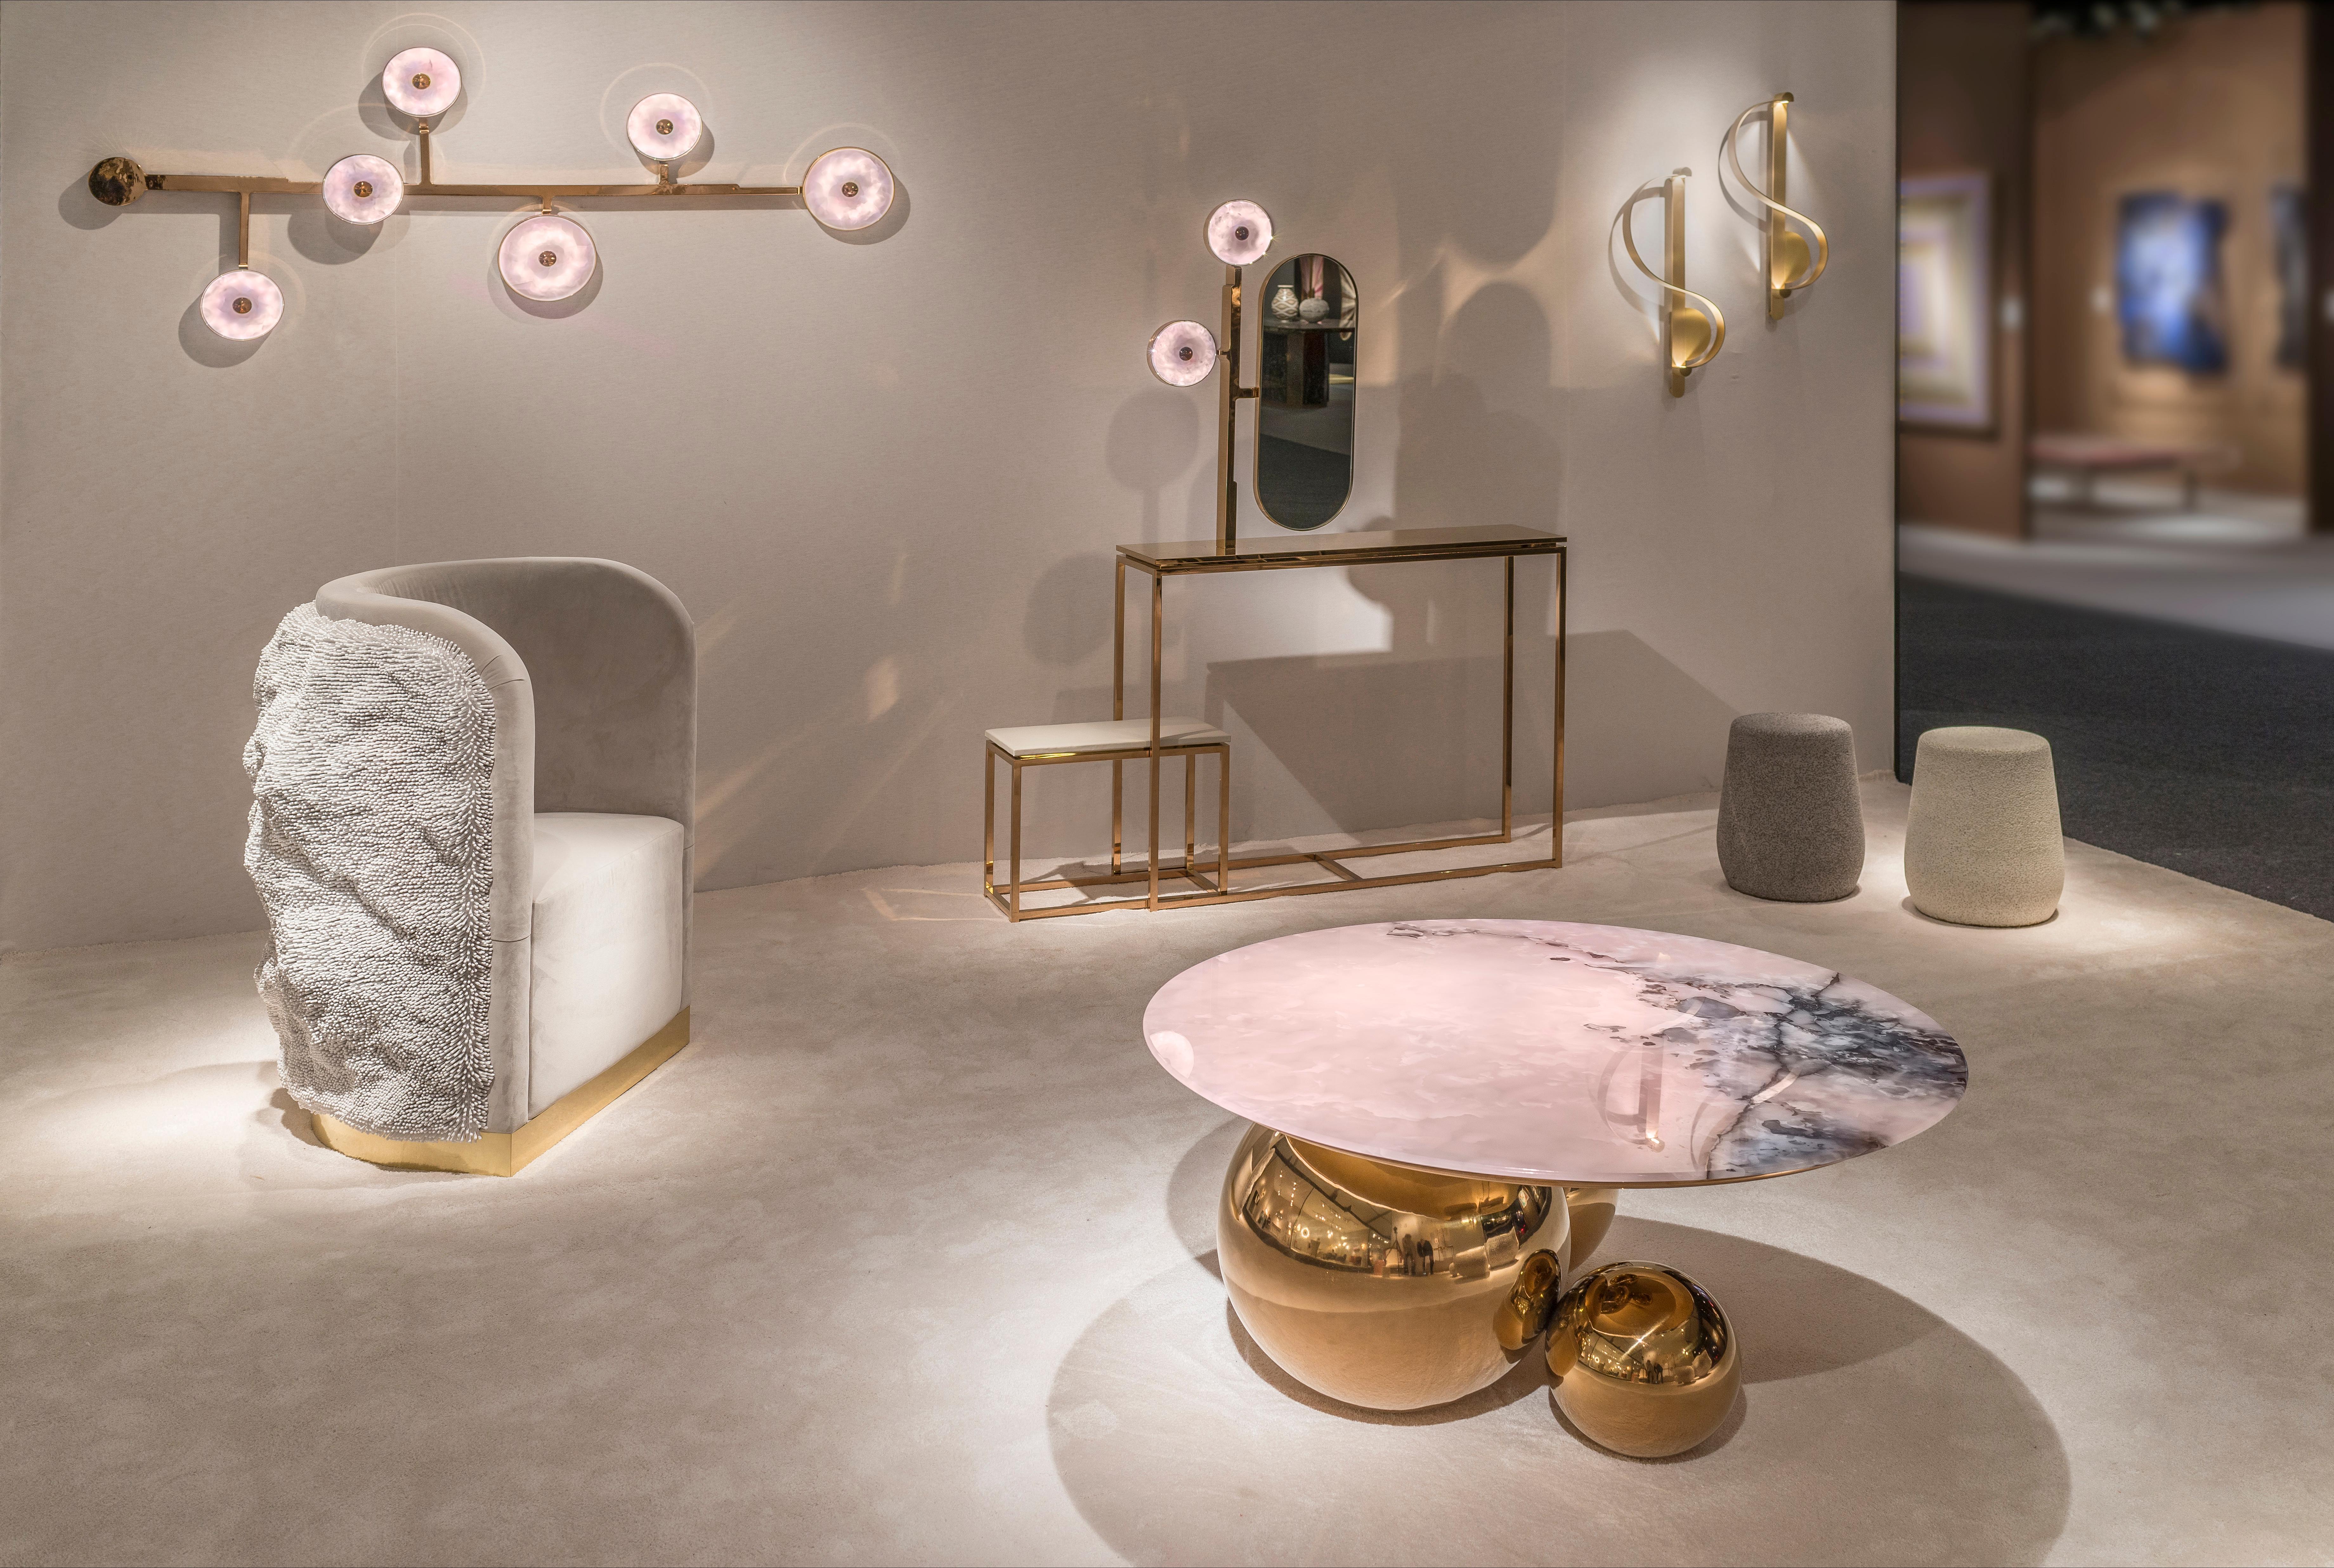 'JinShi Pink Jade Wall Light #2' by acclaimed design duo Studio MVW is an impressive 183 cm long wall lamp including six retro-lit pink jade heads. It is part of ‘JinShi Pink Jade', a precious collection of furniture and lights featuring pink jade,